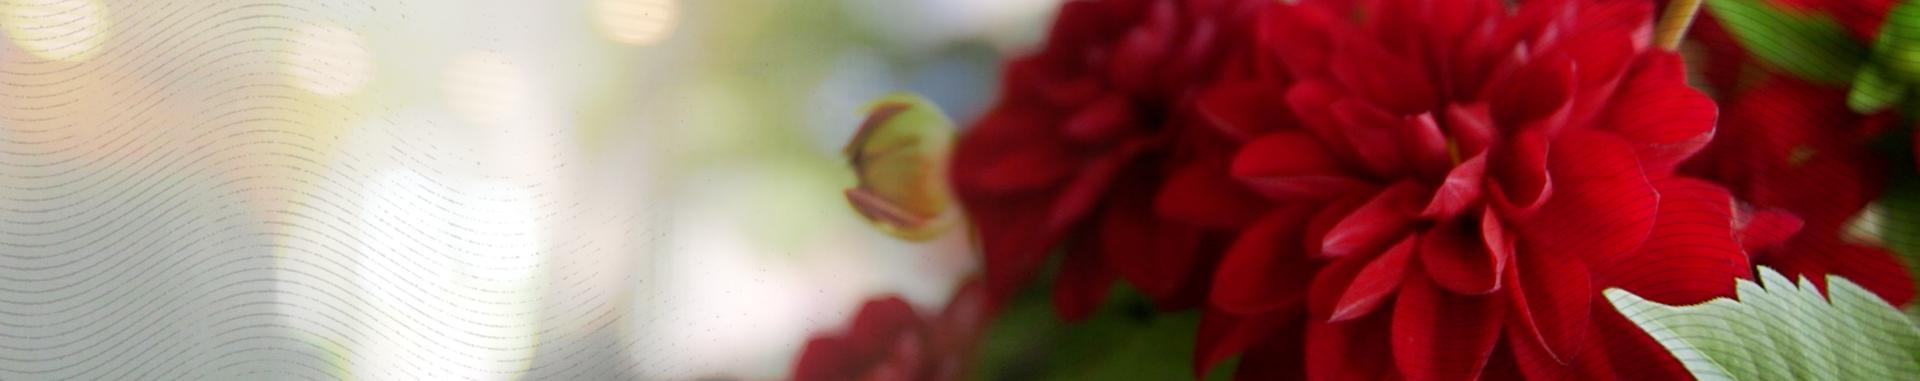 Panoramic color closeup image of a red geranium flower, a still from a Co-op Credit Union video